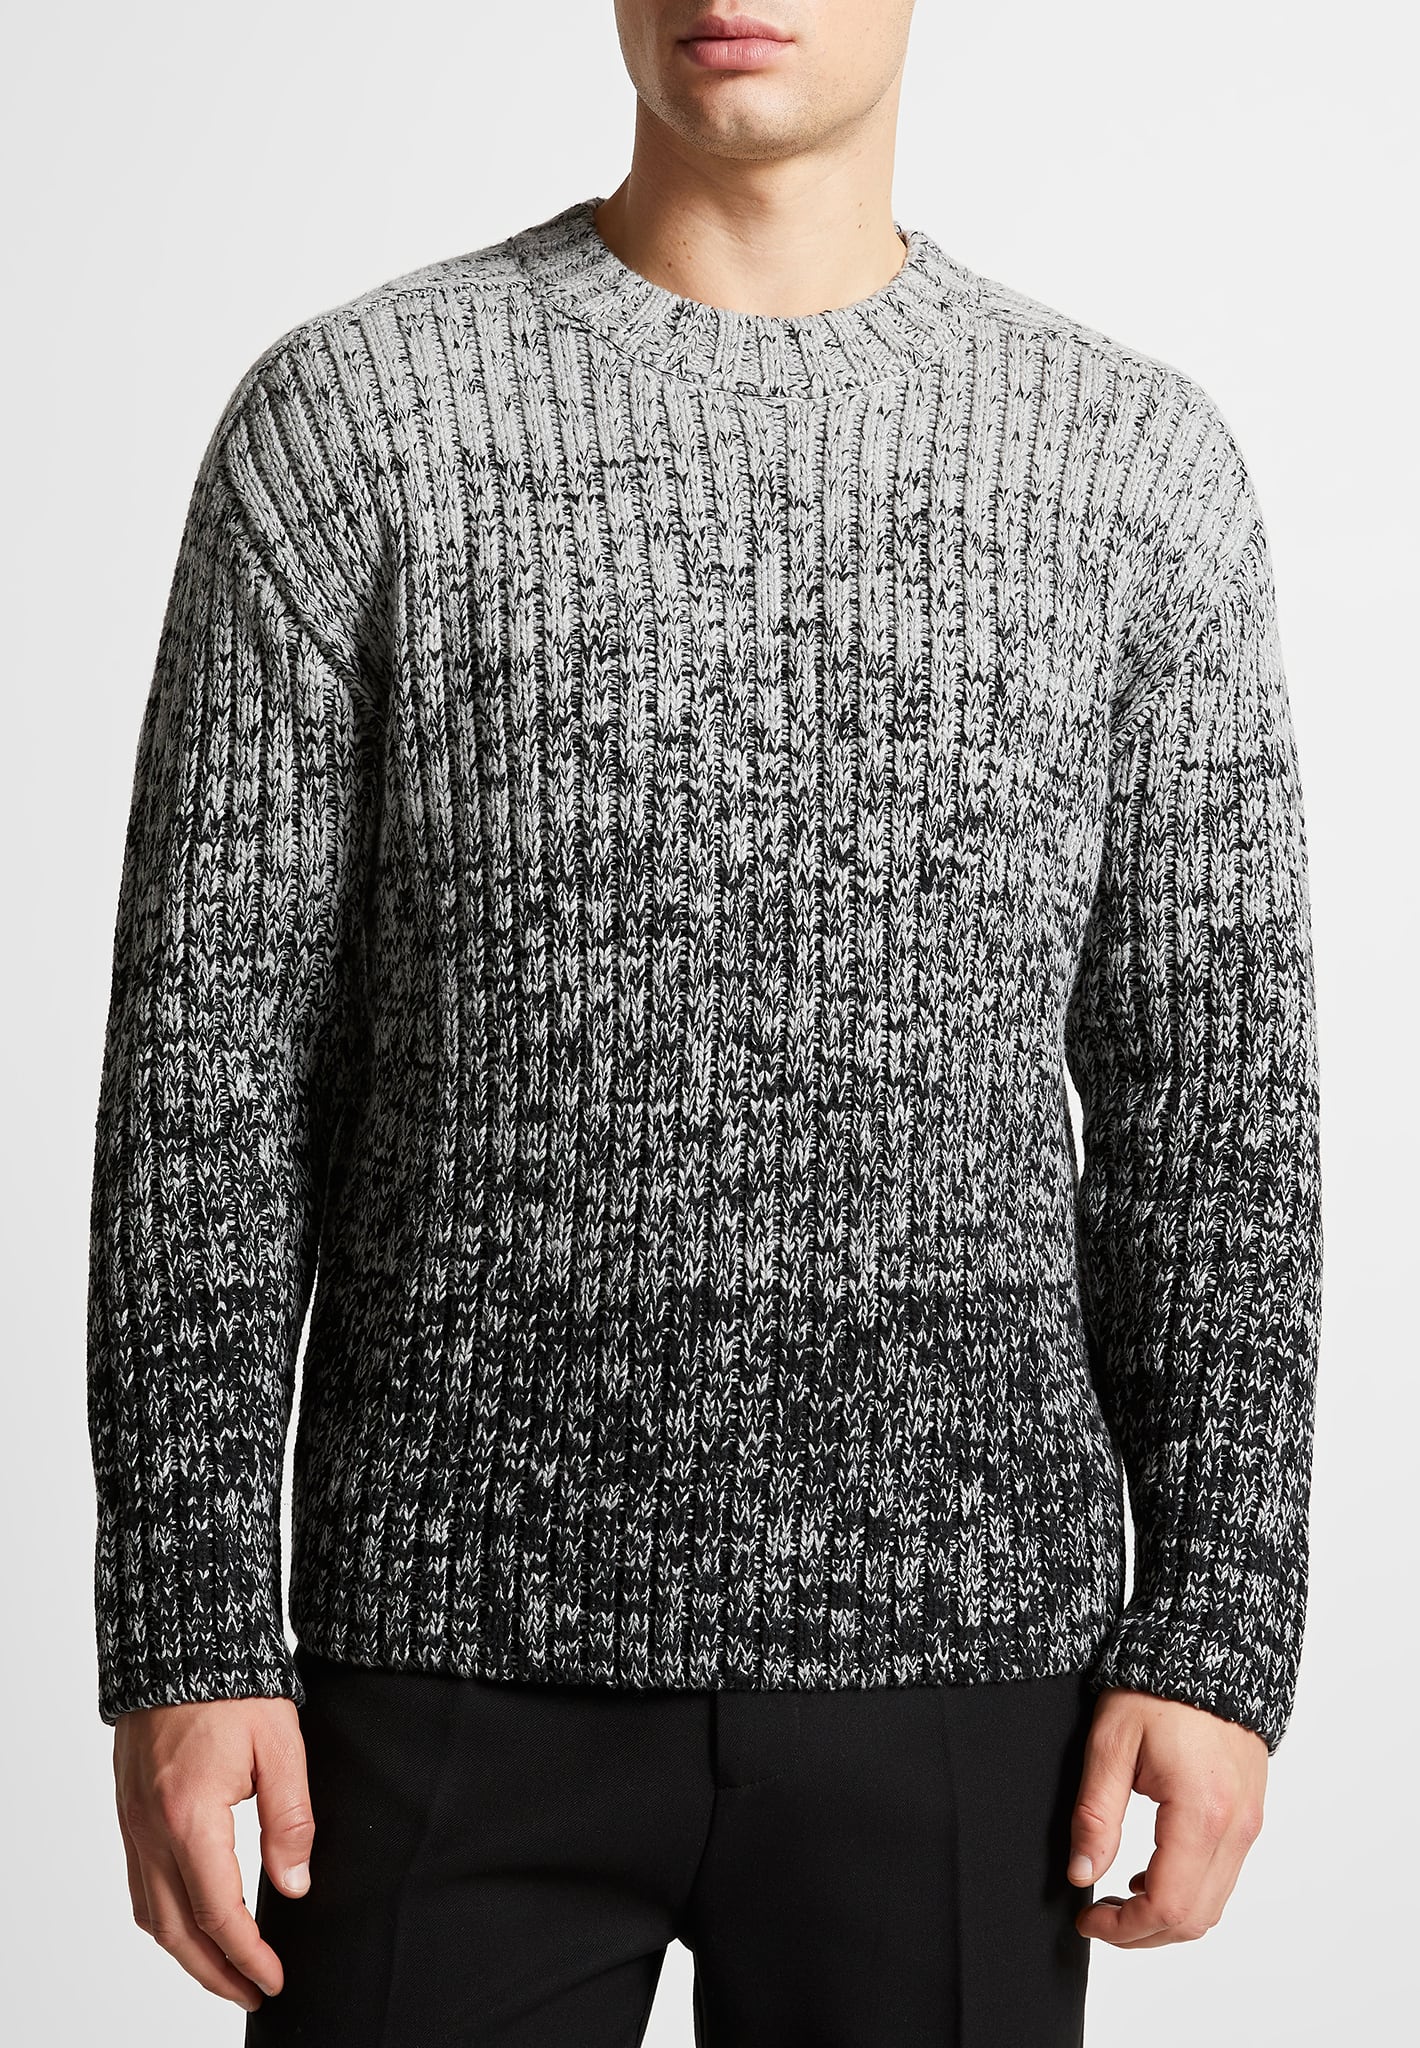 ombre-chunky-knit-jumper-grey-black